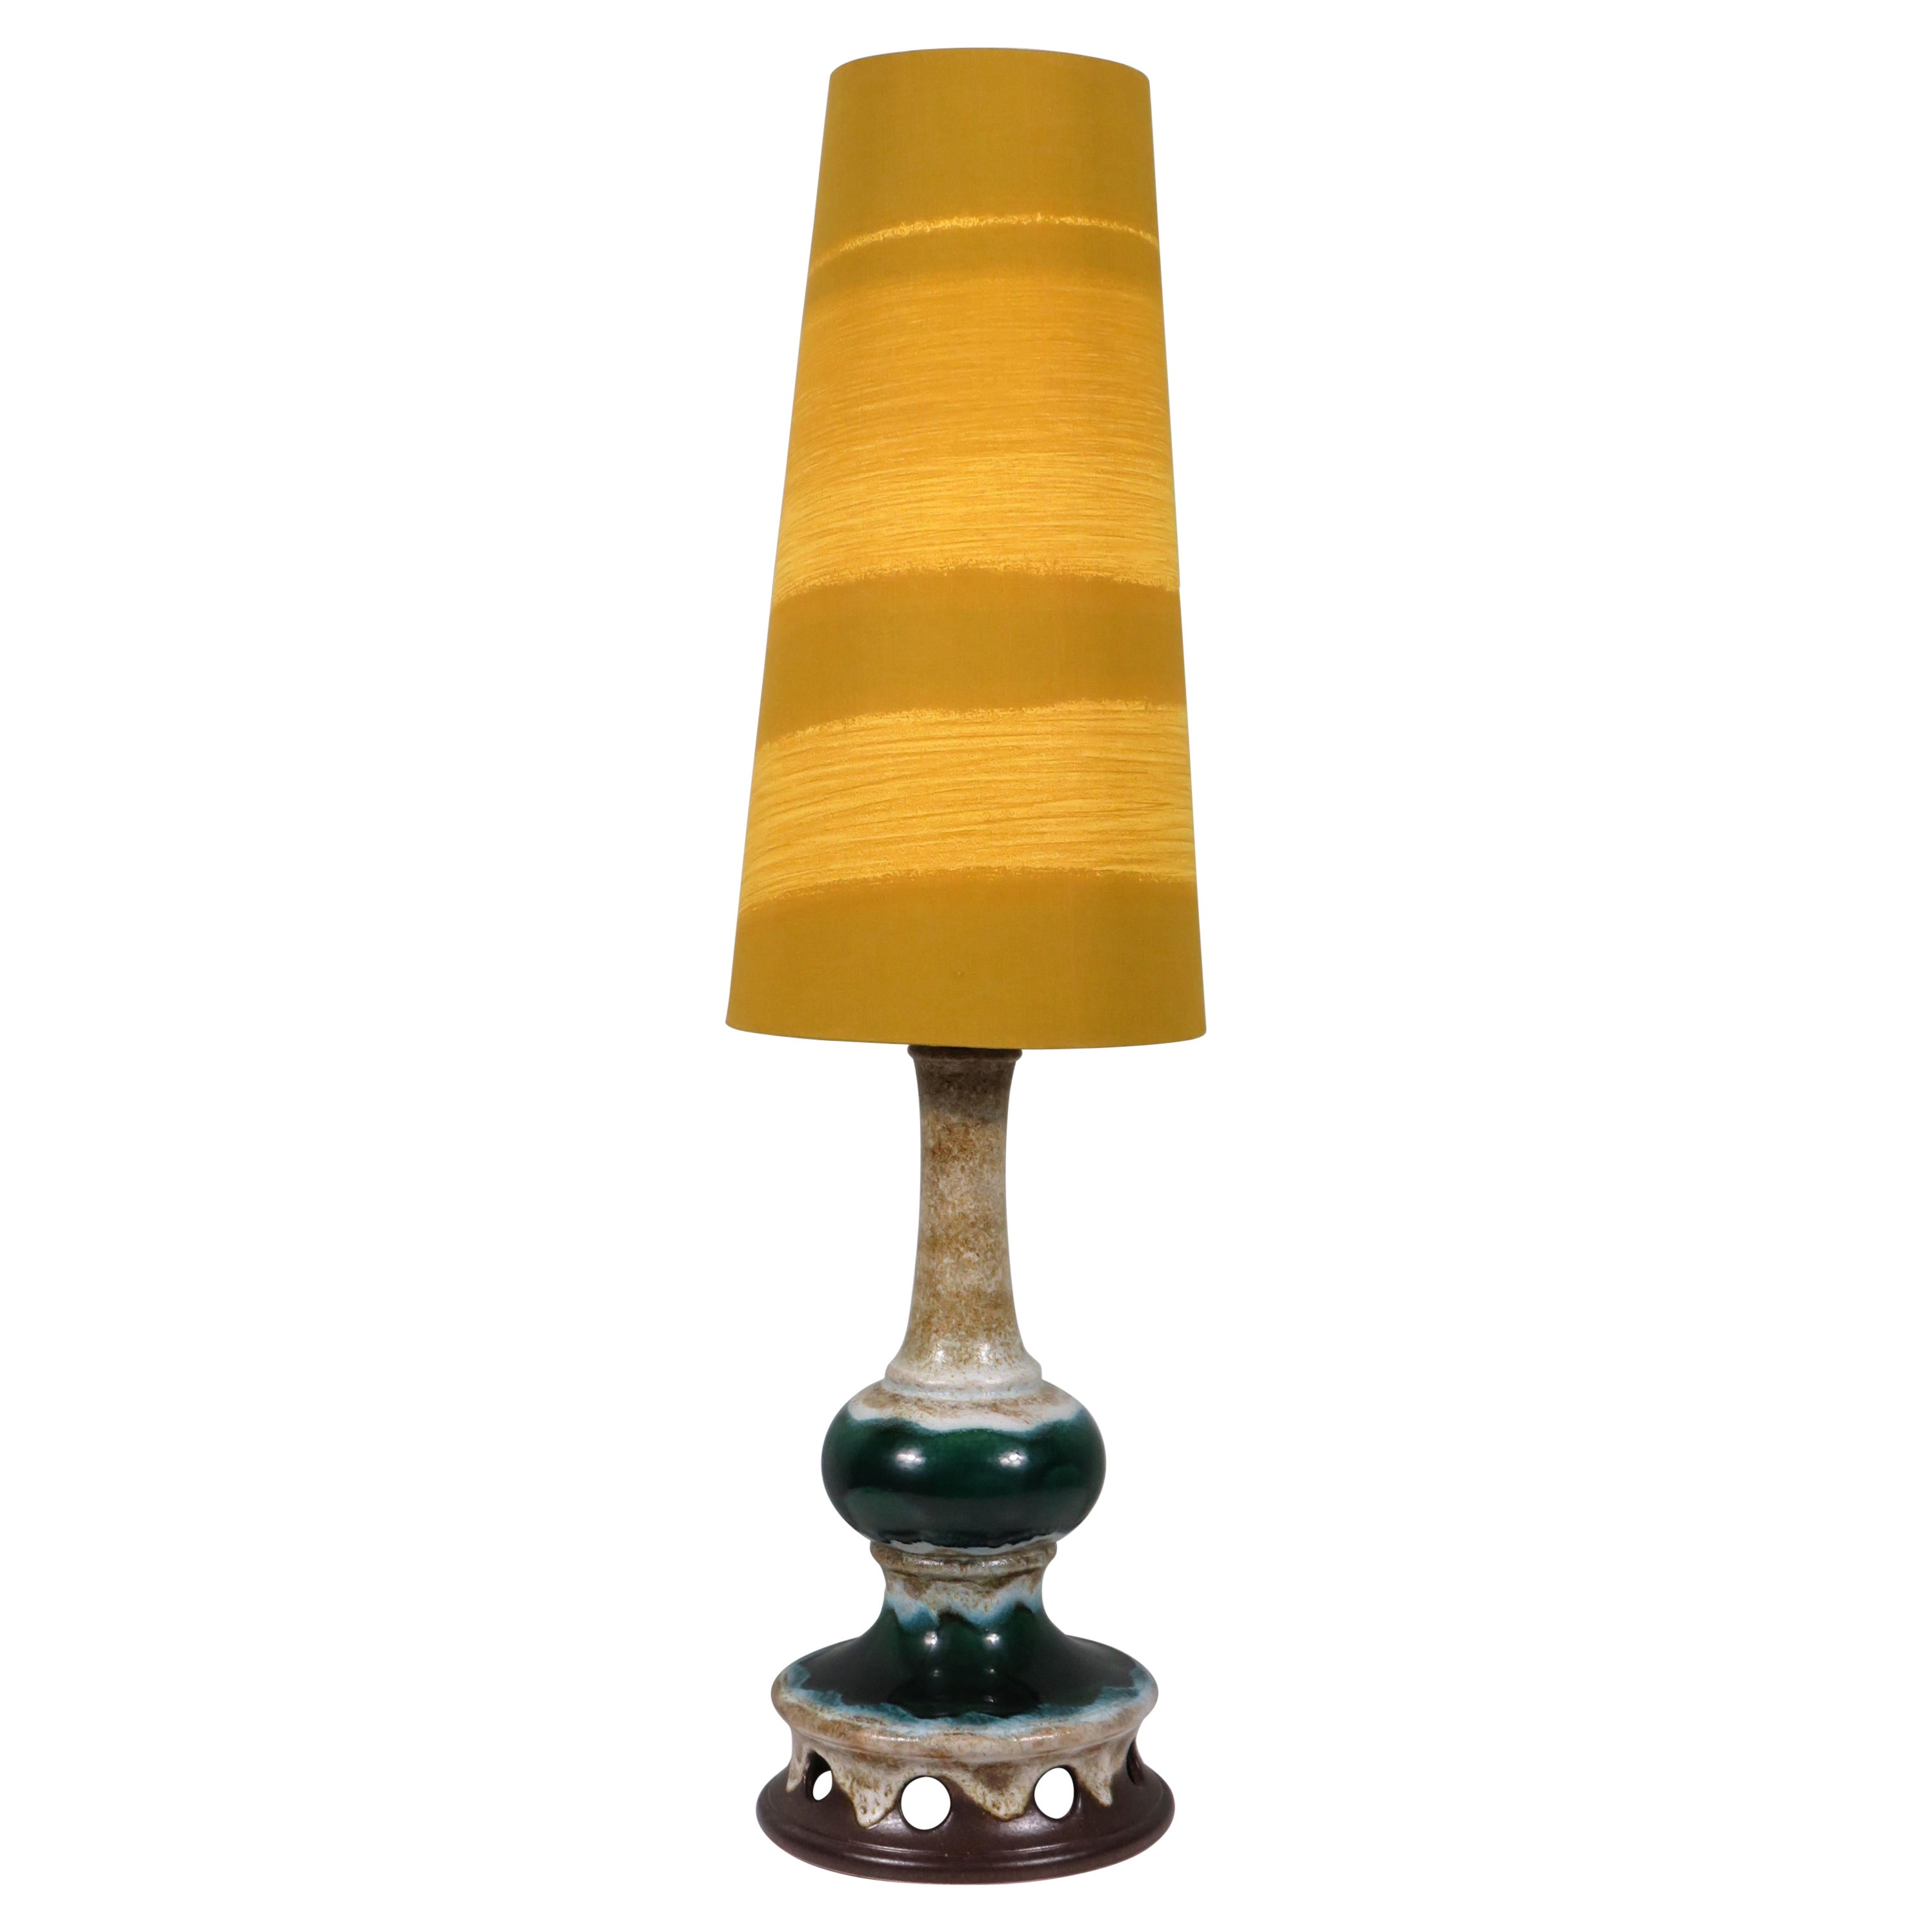 West Germany Dumler & Breiten floor lamp with lampshade made of vintage fabric For Sale